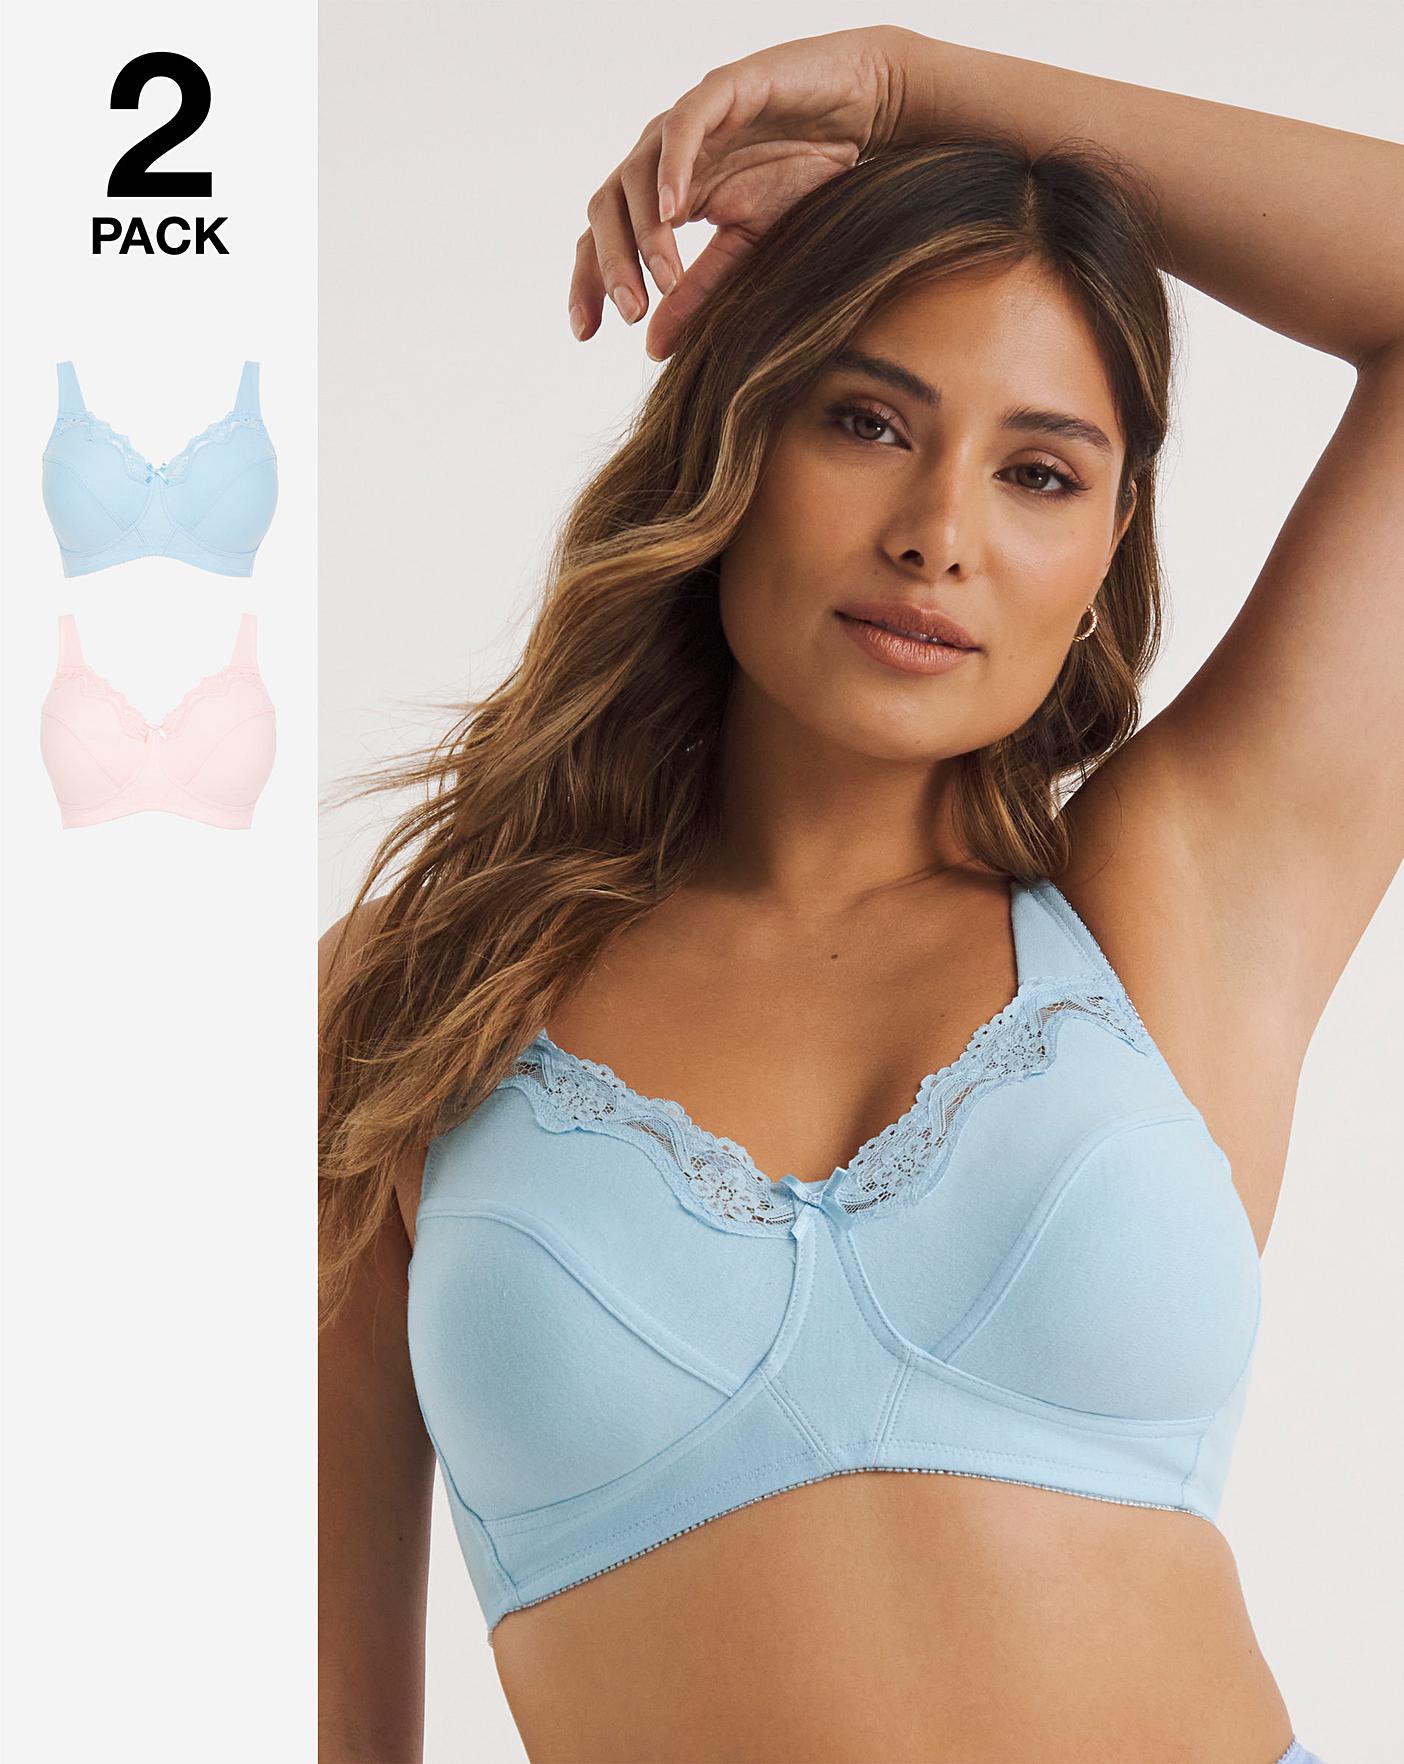 Find Types of Bra for Your Outfit - Gorgeous & Beautiful